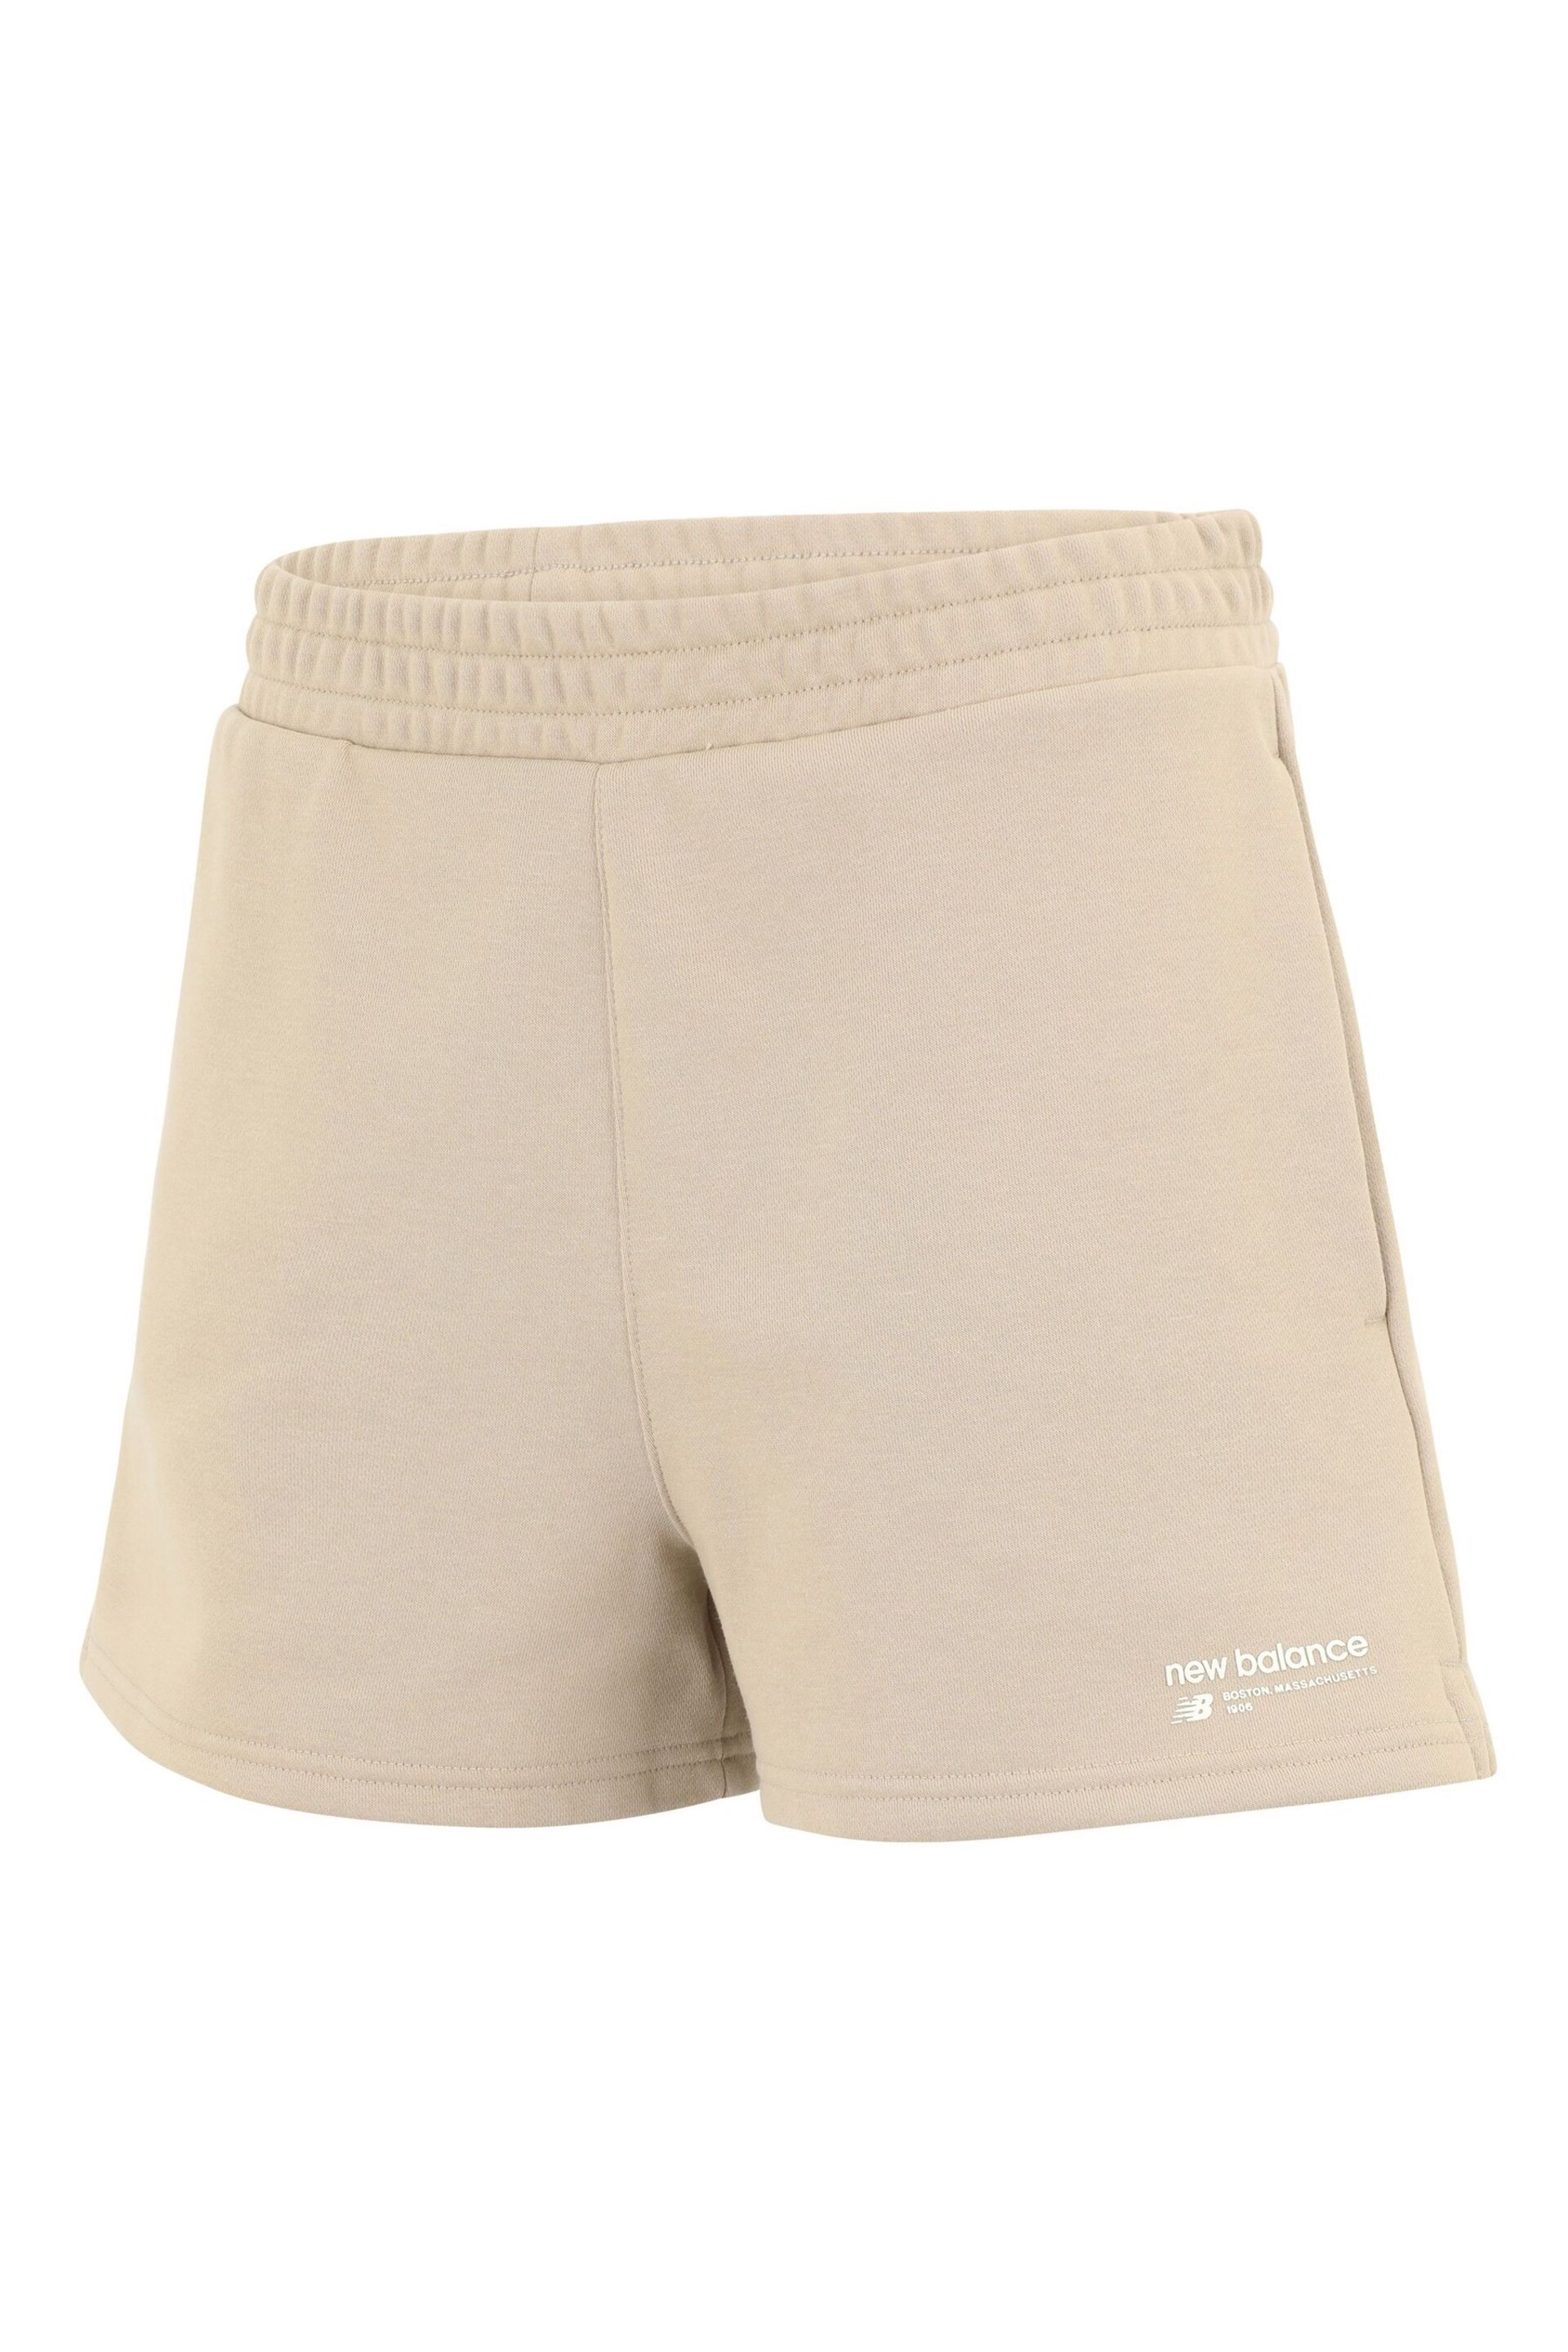 New Balance Brown Linear Heritage French Terry Shorts - Image 6 of 7